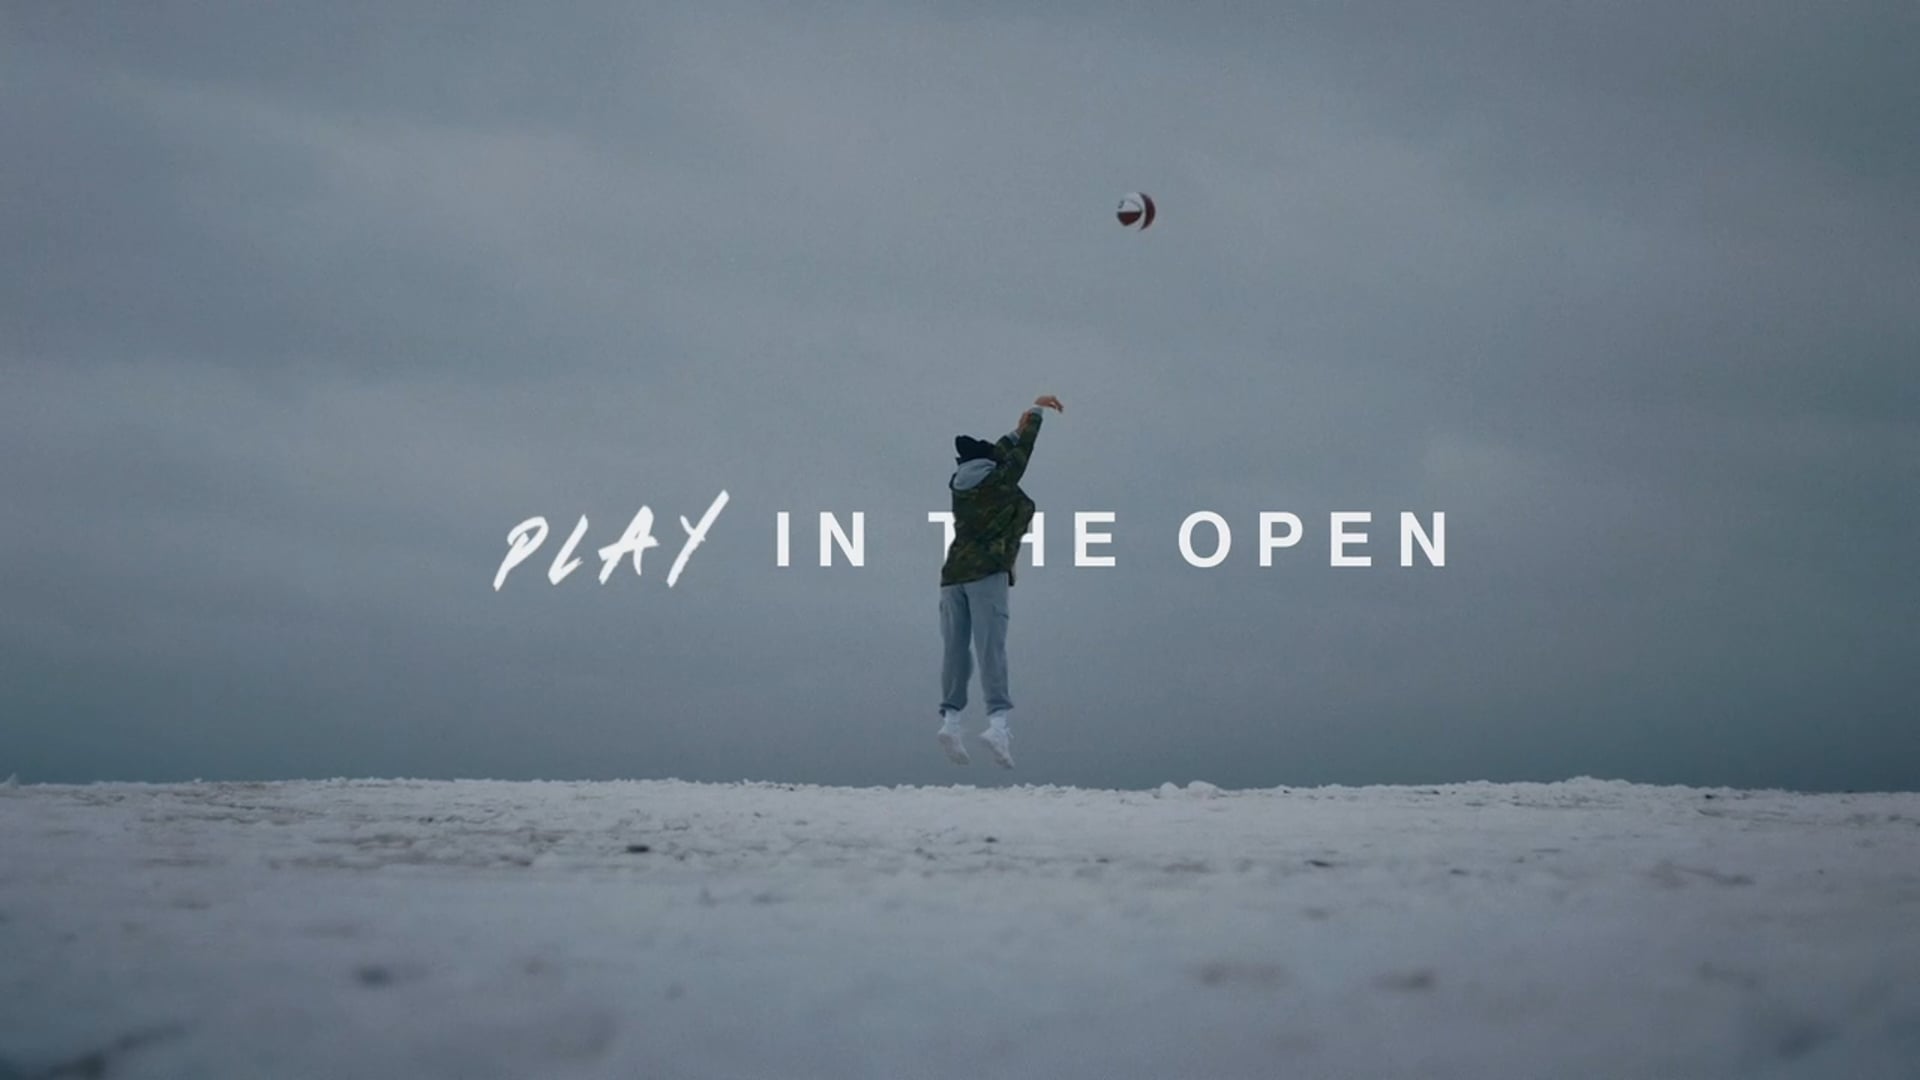 Canada Goose x NBA: Play In The Open (Studio Recording, Post Production)